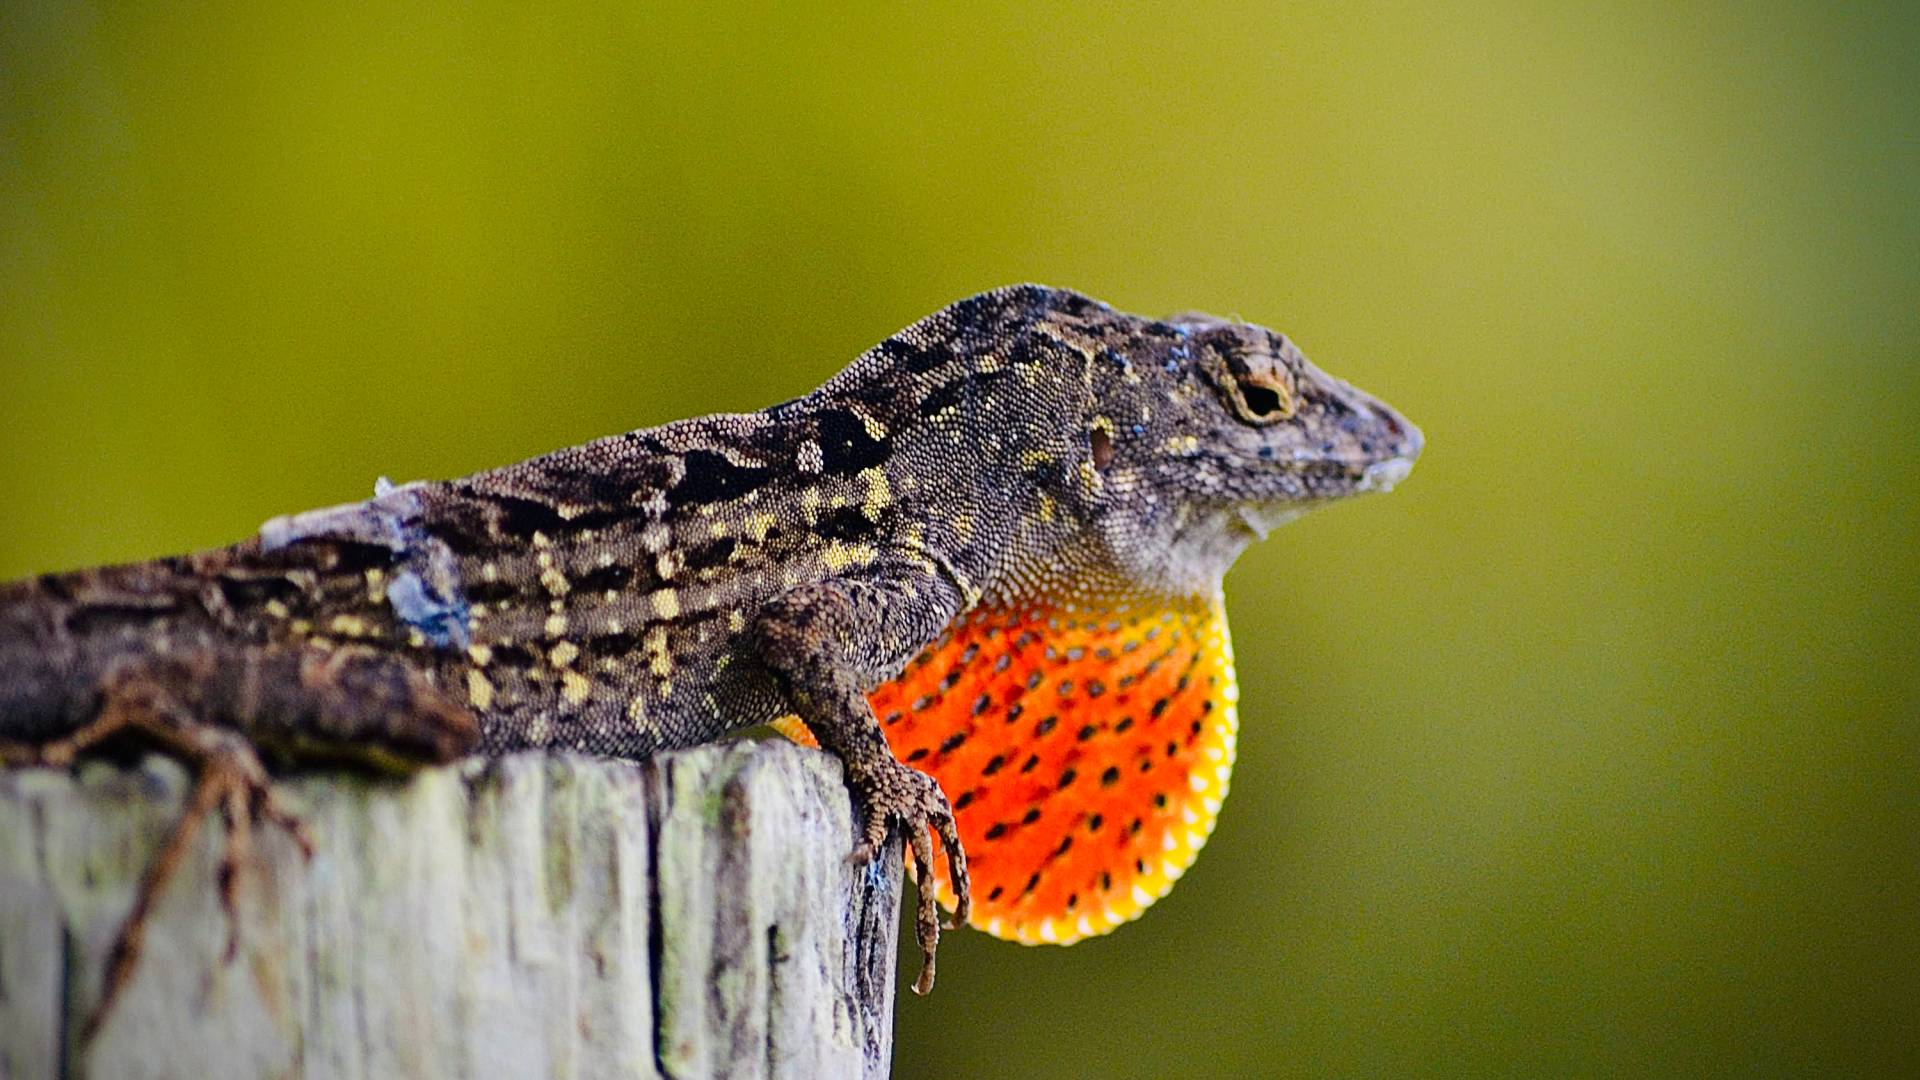 lizard with a bright throat pouch